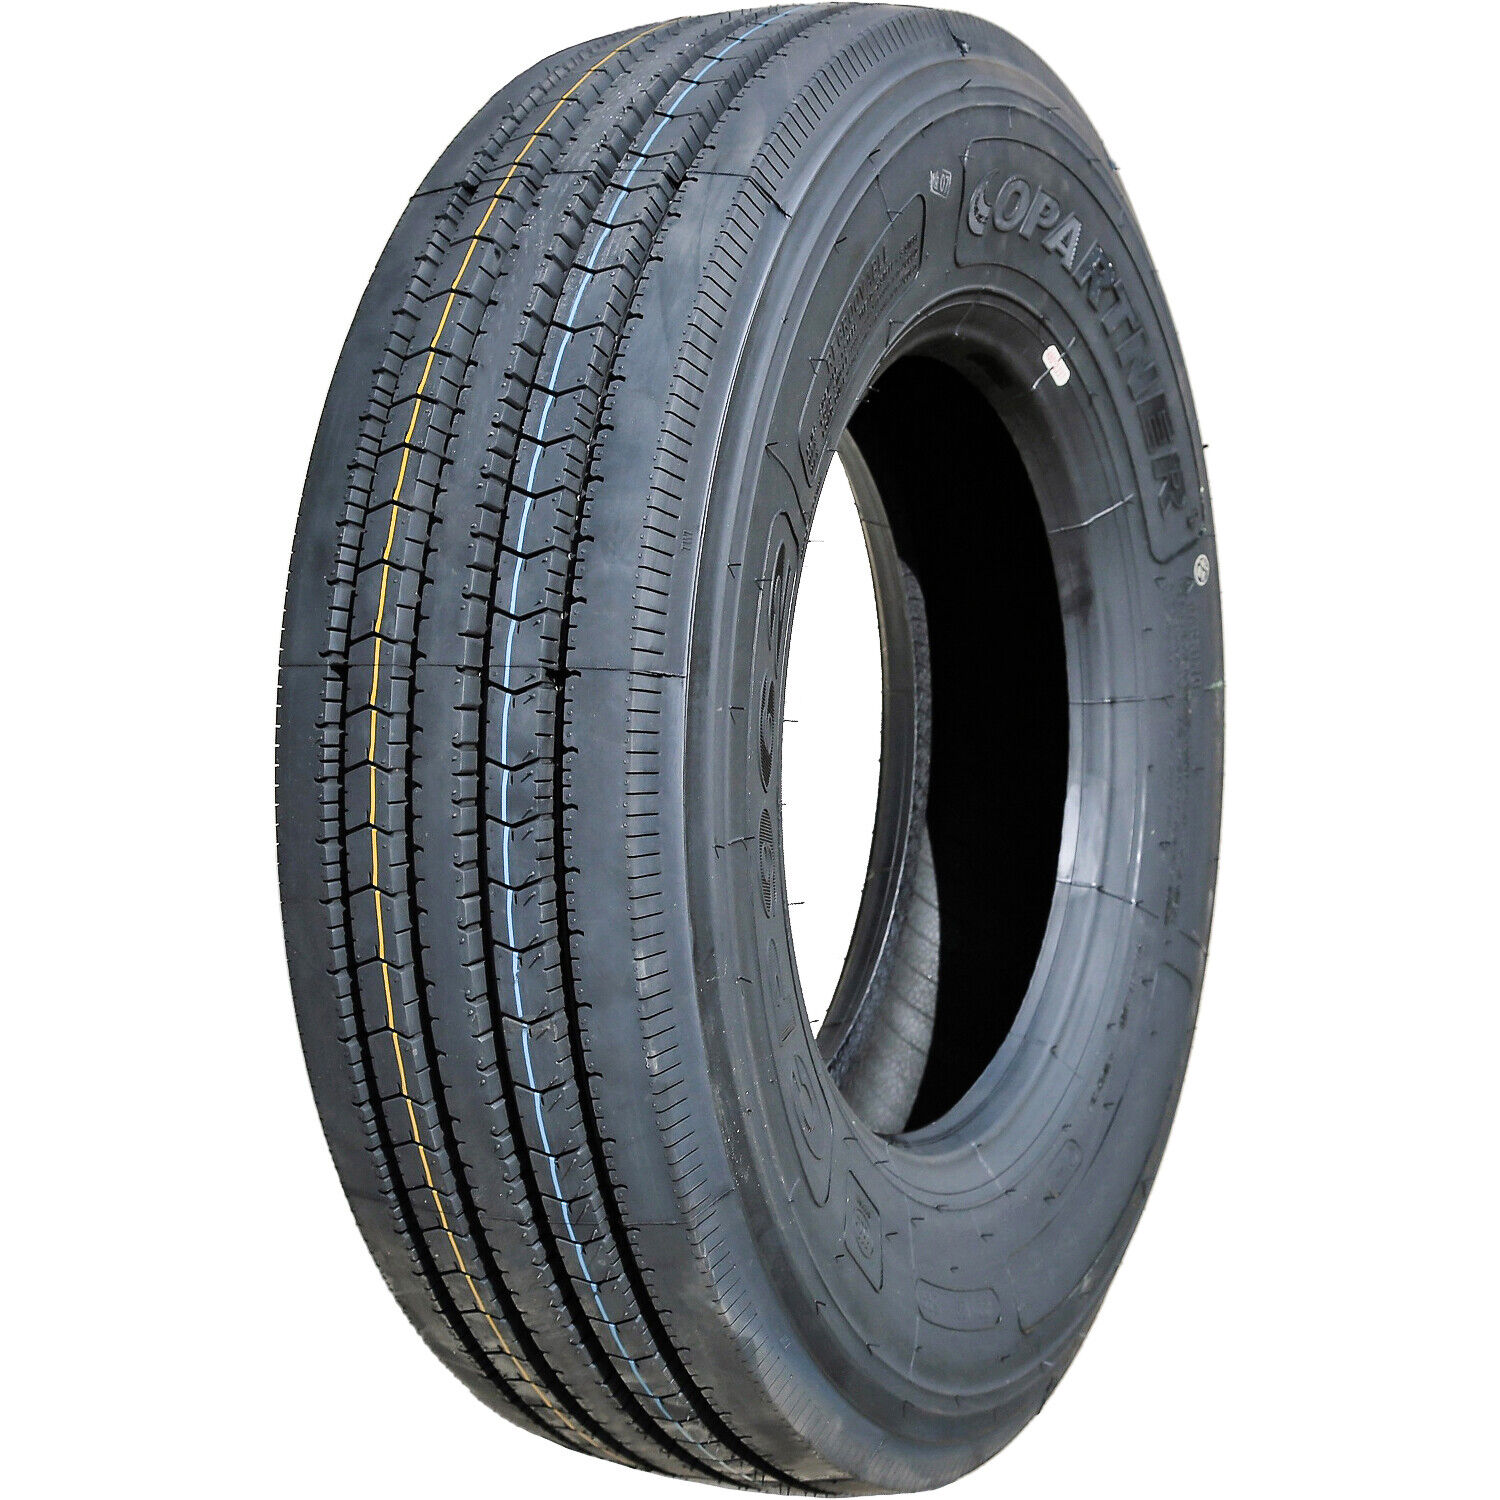 Tire Copartner CP962 235/75R17.5 Load H 16 Ply Commercial